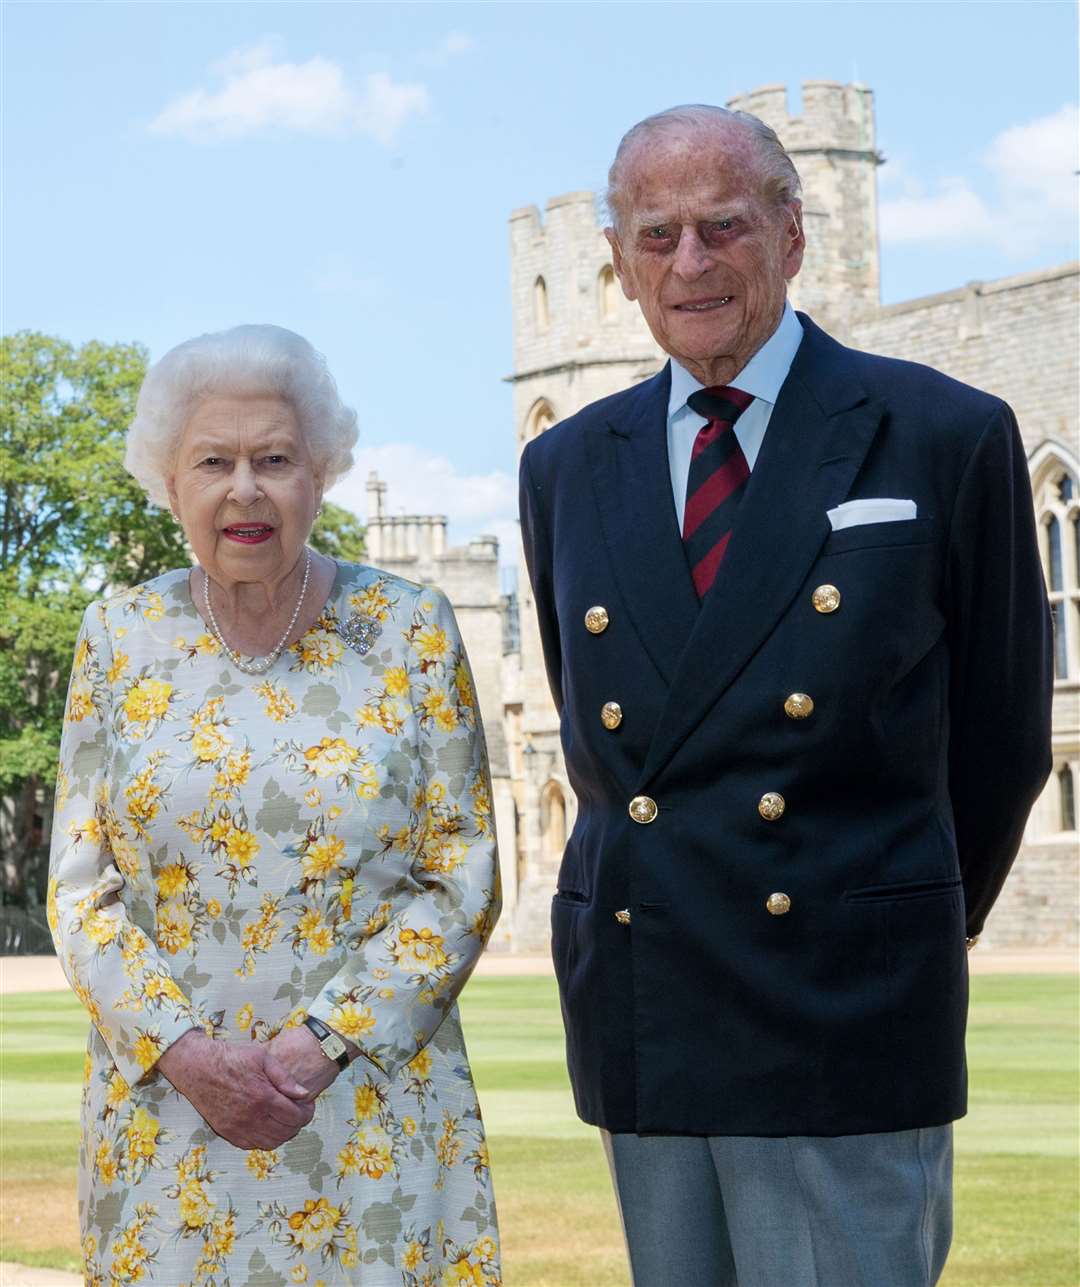 The Queen and Philip at Windsor Castle during lockdown (Steve Parsons/PA)